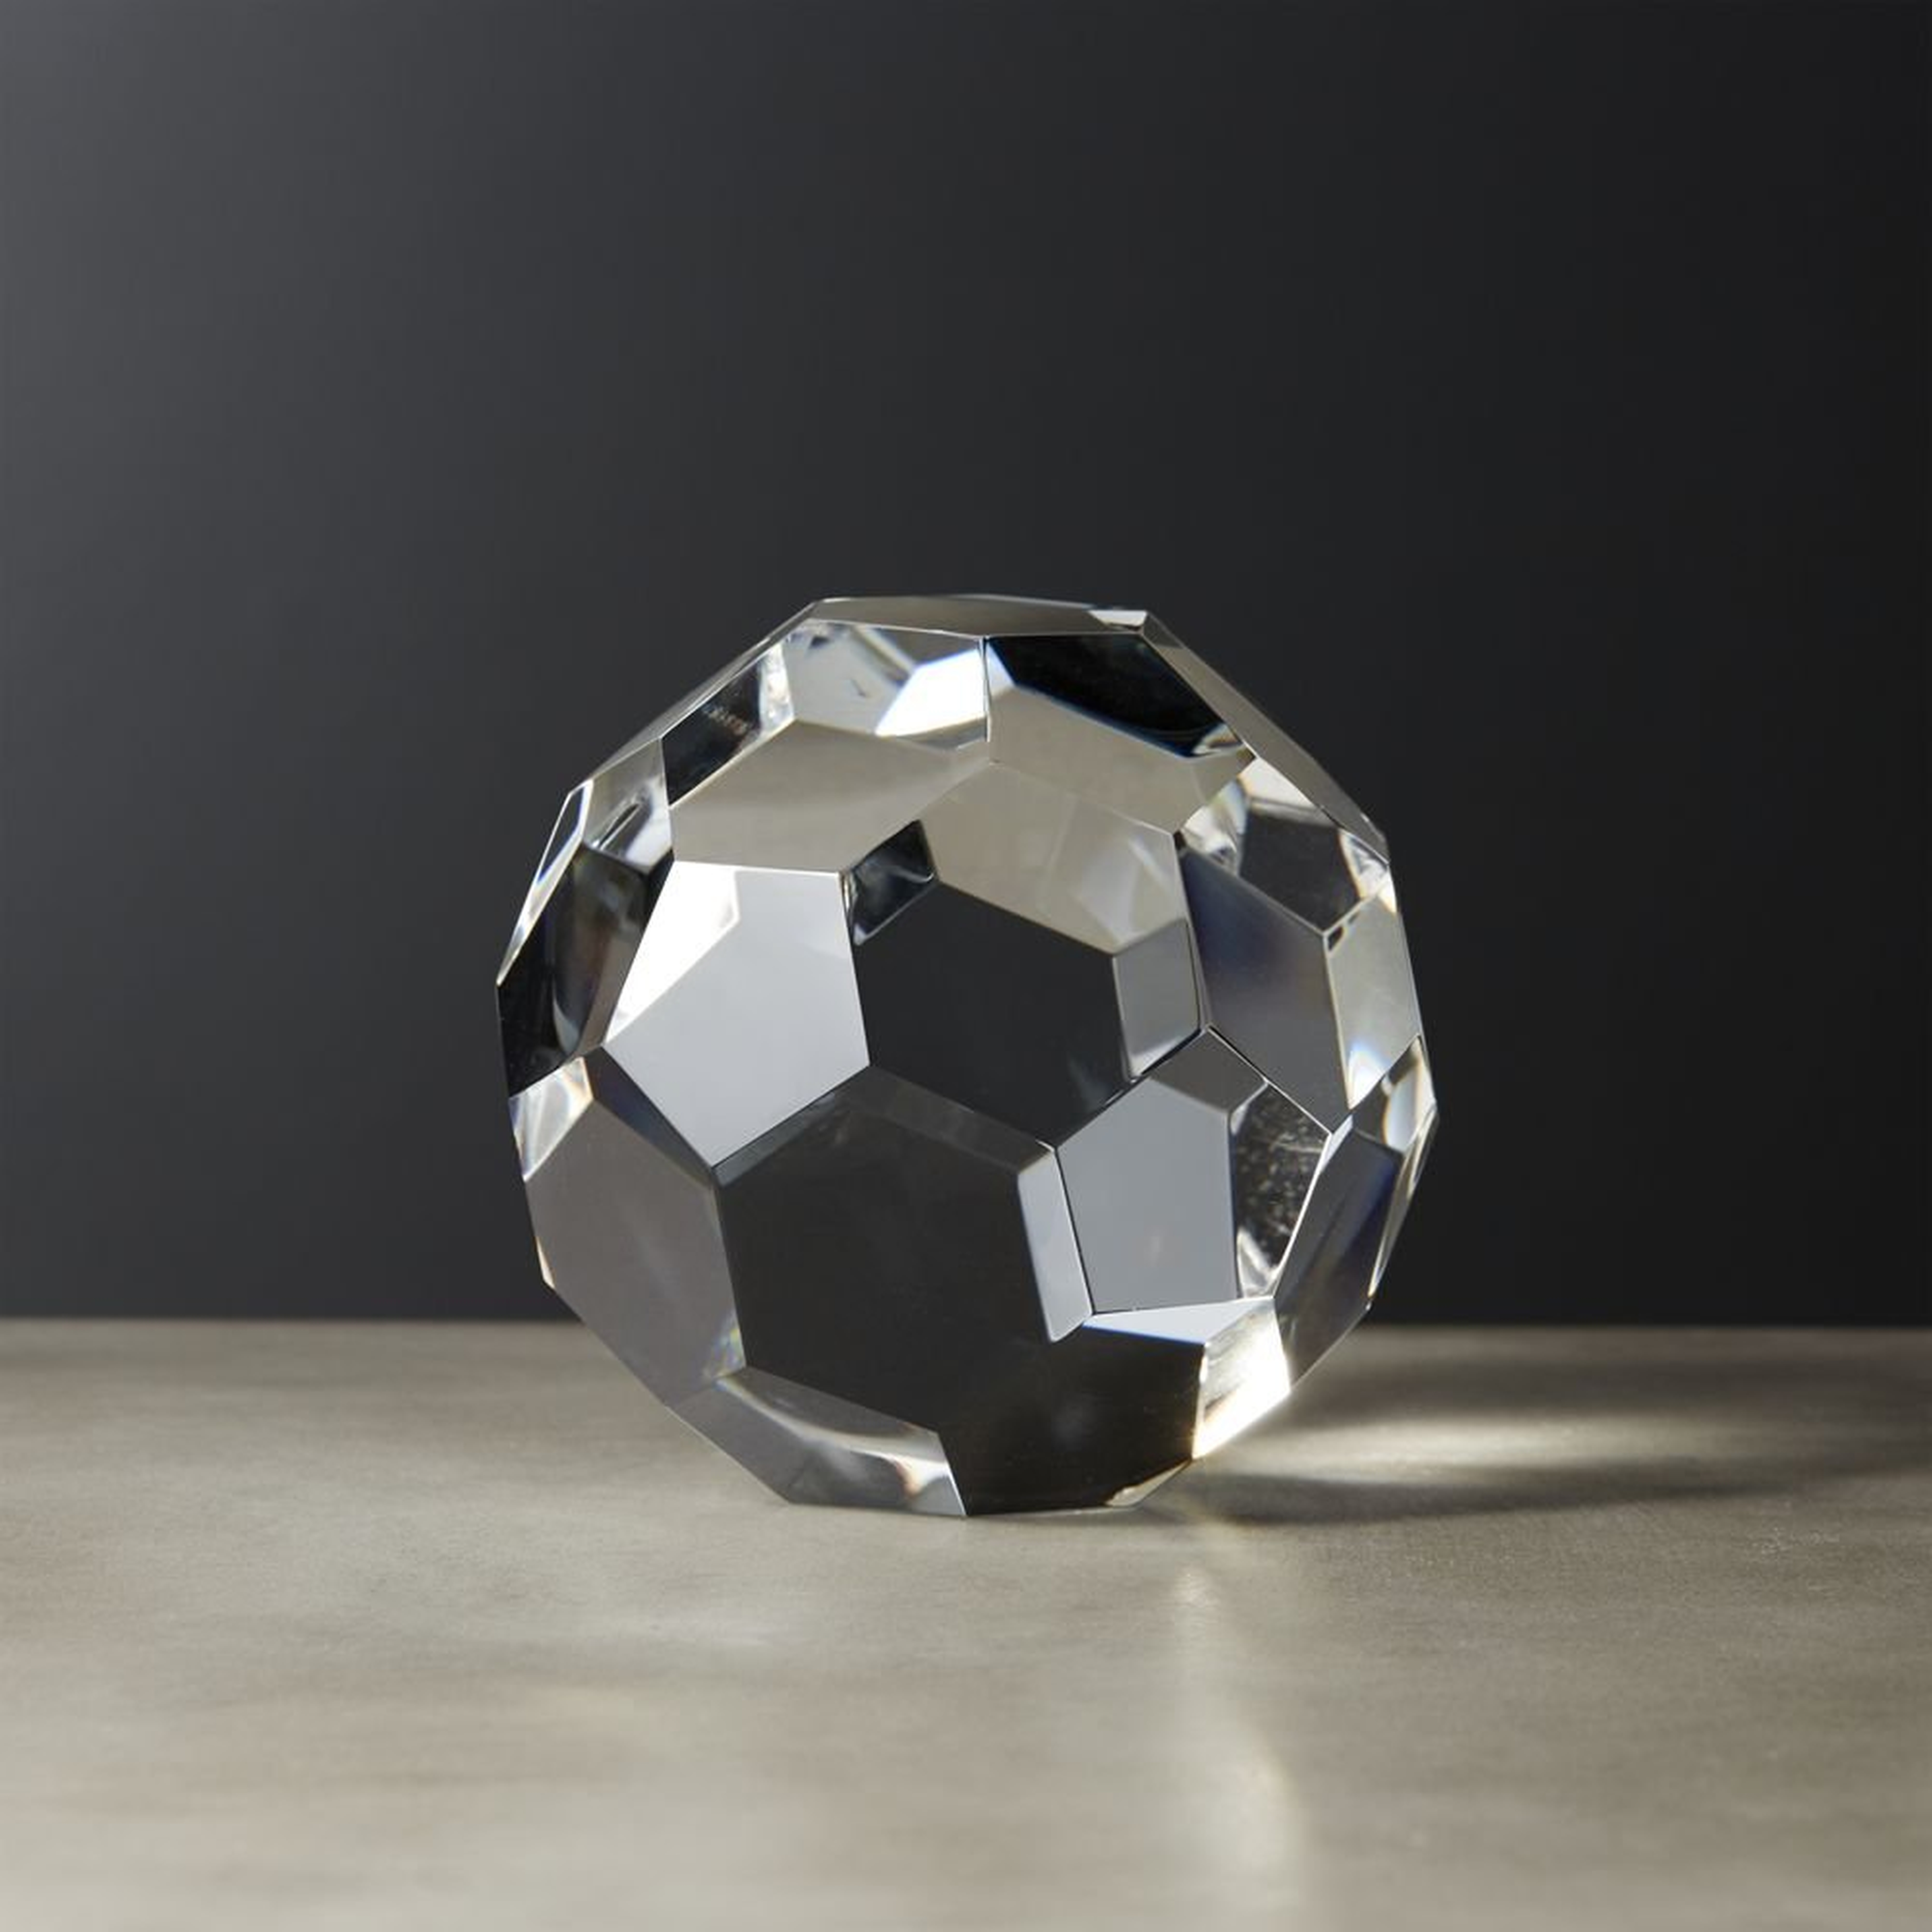 Andre Large Crystal Sphere - CB2